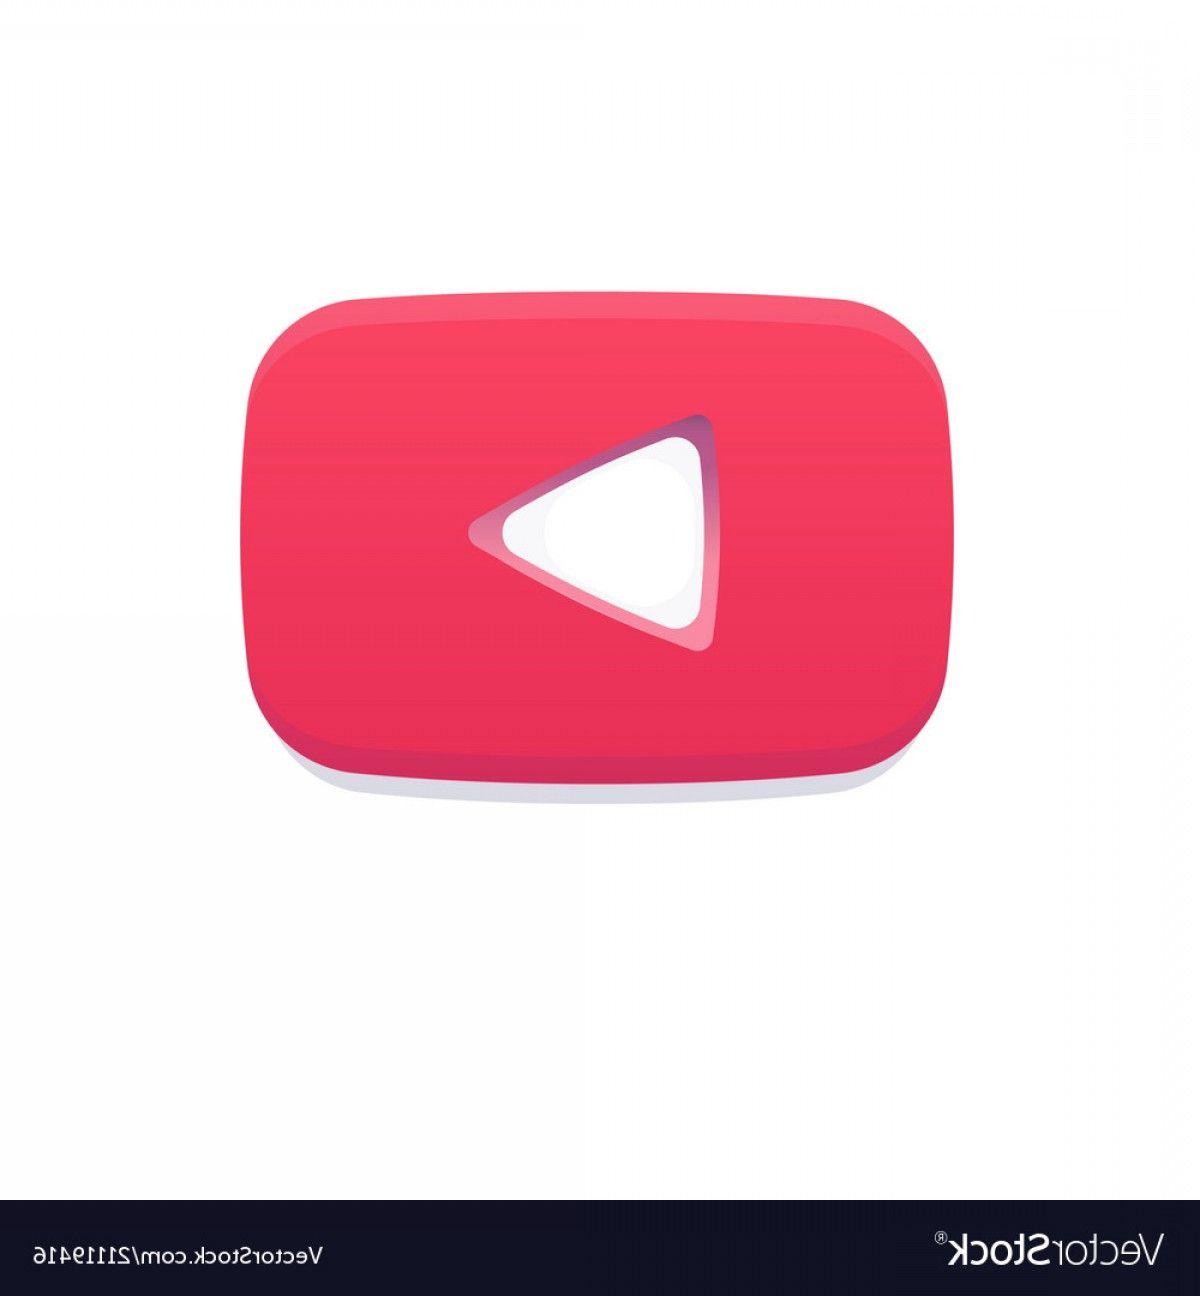 Notification Logo - Red Play Flat Logo Youtube Notification Icon Like Vector